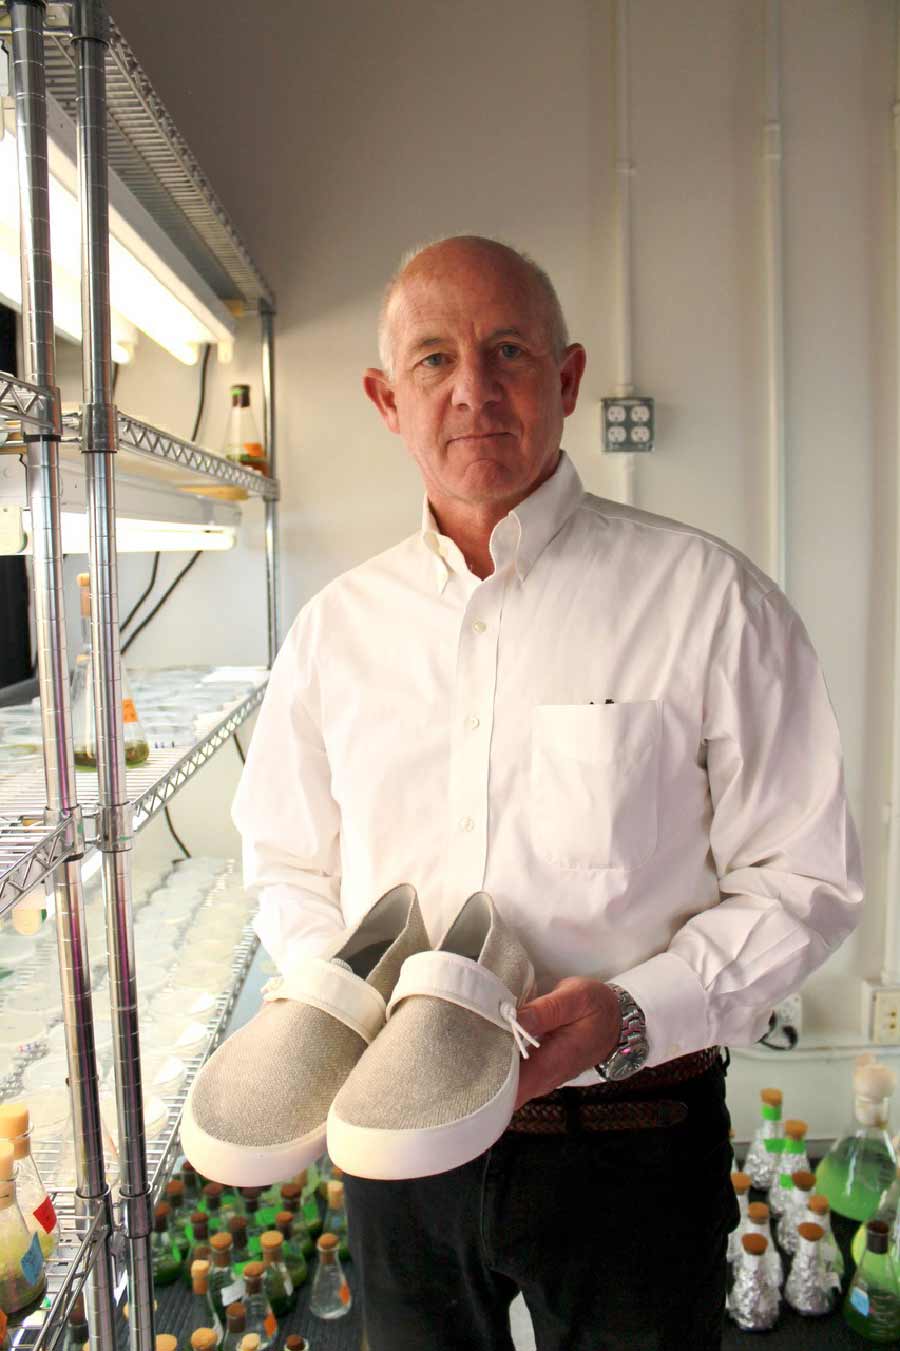 Stephen Mayfield holding the alage shoes